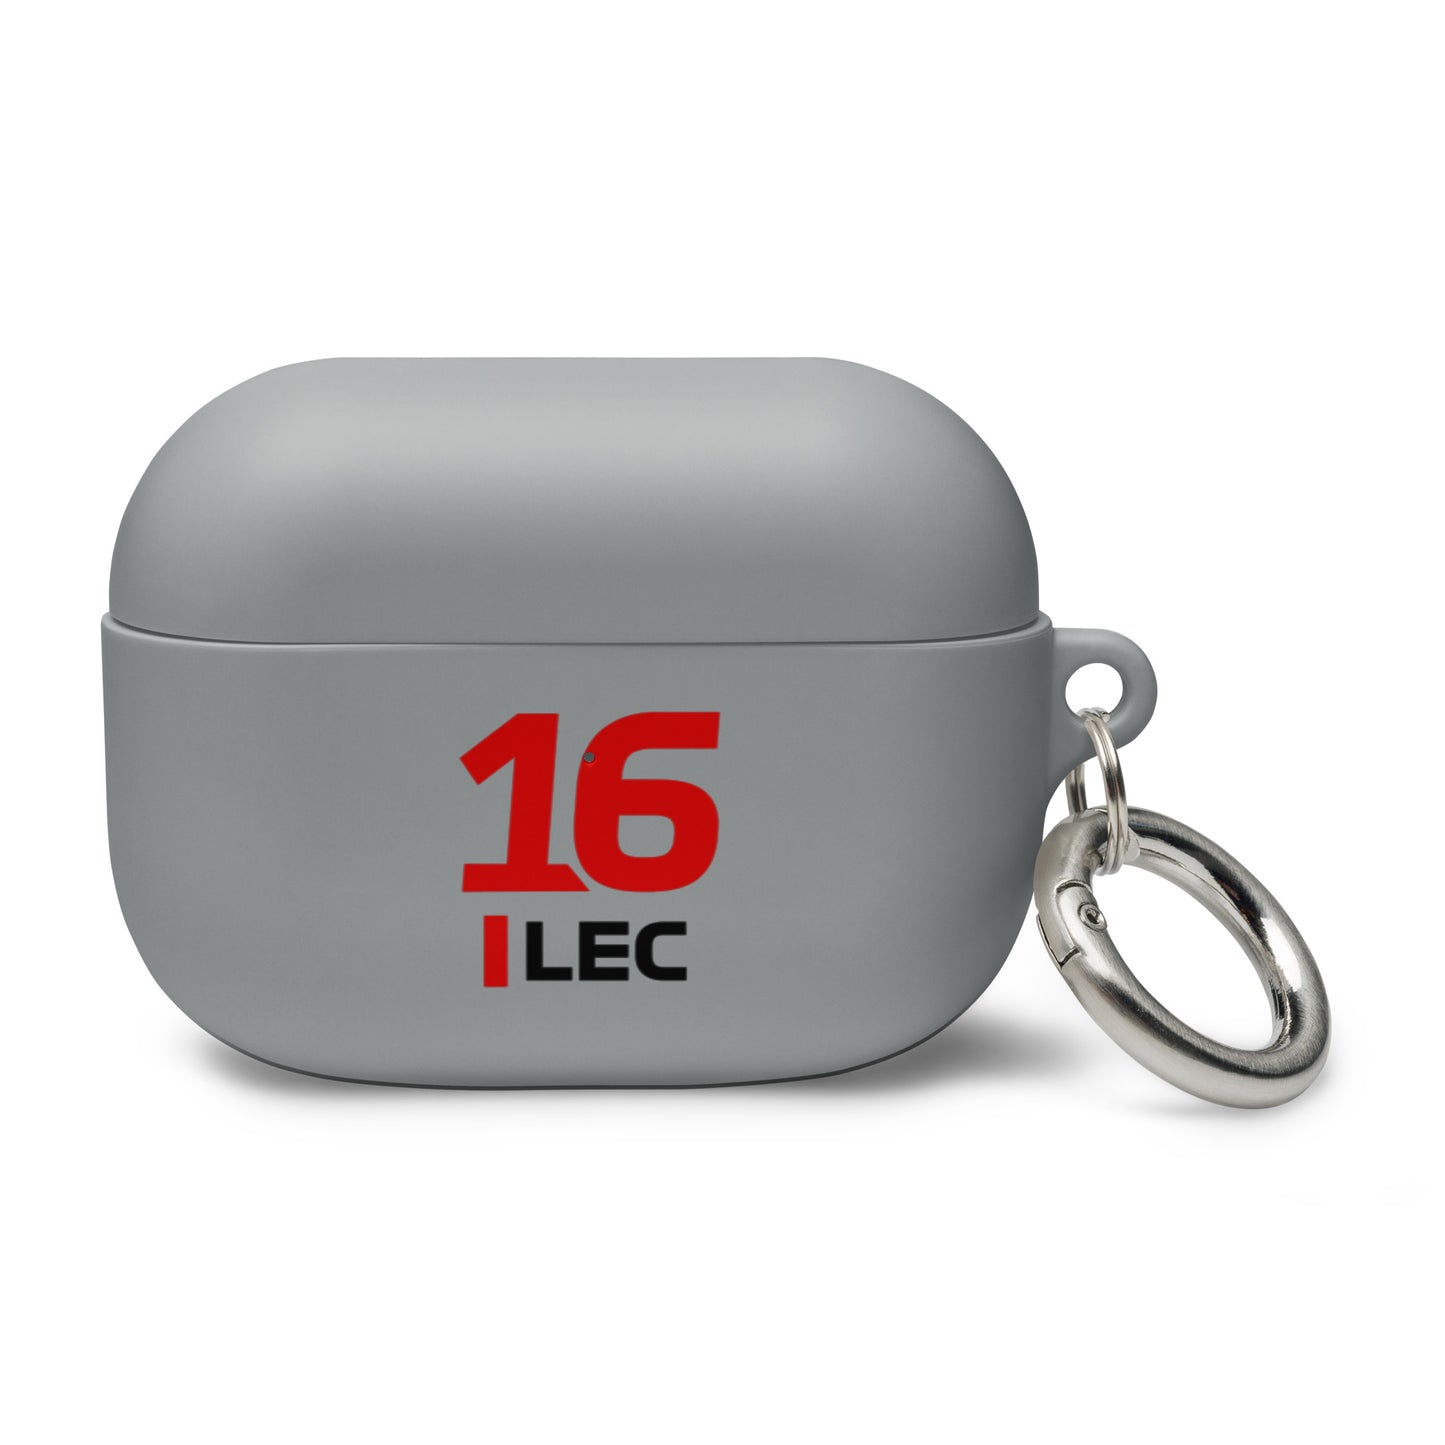 Charles Leclerc AirPods Case pro grey